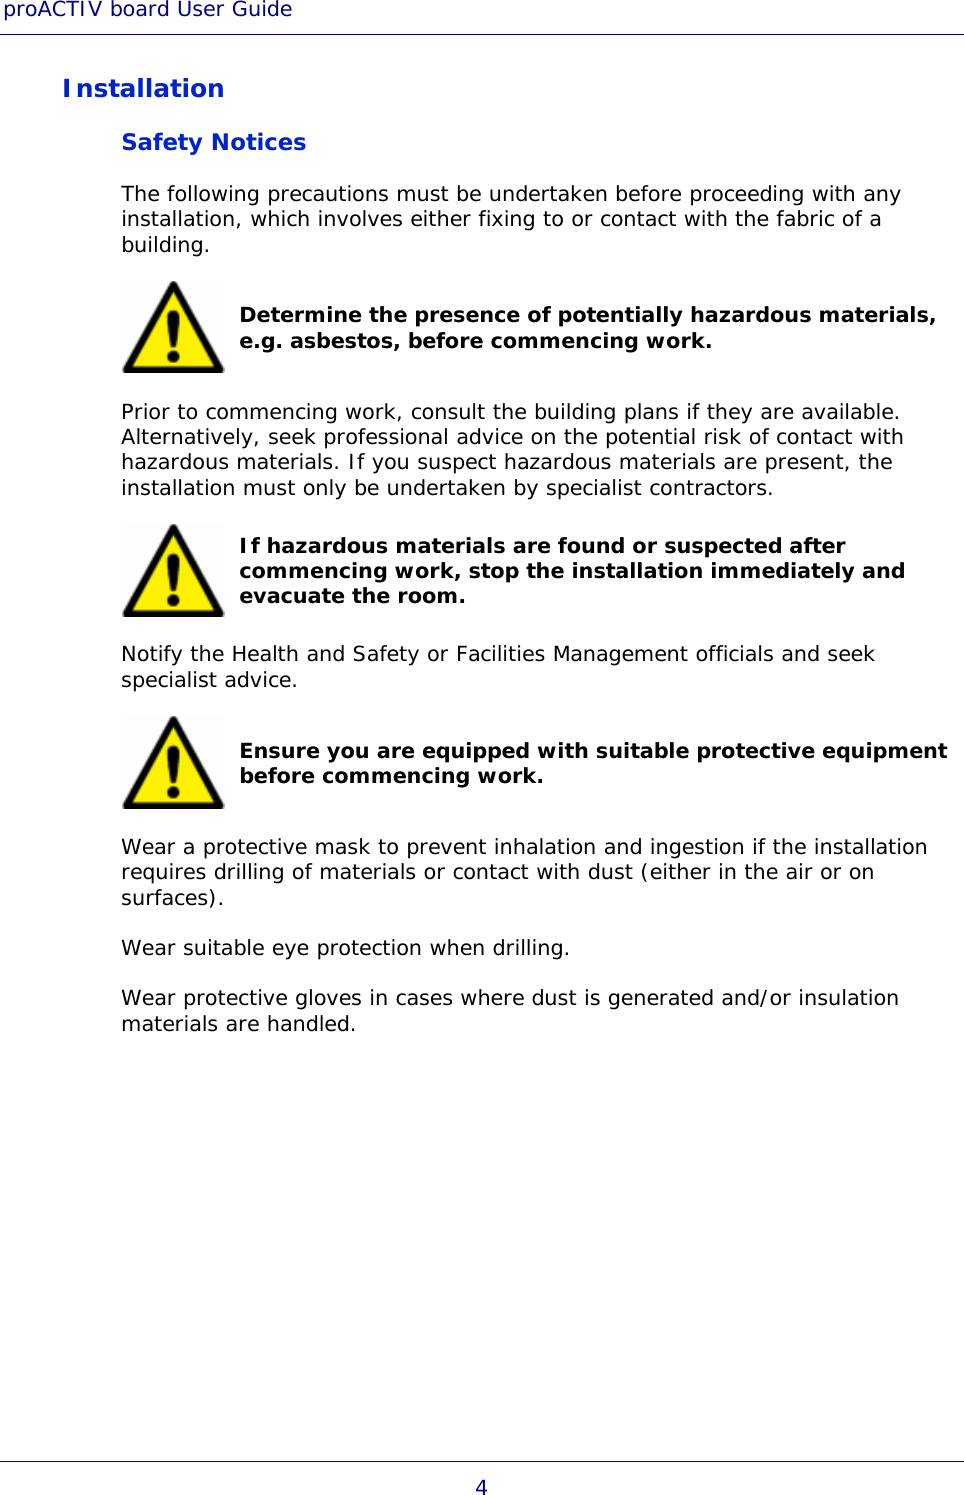 proACTIV board User Guide 4 Installation Safety Notices The following precautions must be undertaken before proceeding with any installation, which involves either fixing to or contact with the fabric of a building.  Determine the presence of potentially hazardous materials, e.g. asbestos, before commencing work. Prior to commencing work, consult the building plans if they are available. Alternatively, seek professional advice on the potential risk of contact with hazardous materials. If you suspect hazardous materials are present, the installation must only be undertaken by specialist contractors.  If hazardous materials are found or suspected after commencing work, stop the installation immediately and evacuate the room. Notify the Health and Safety or Facilities Management officials and seek specialist advice.  Ensure you are equipped with suitable protective equipment before commencing work. Wear a protective mask to prevent inhalation and ingestion if the installation requires drilling of materials or contact with dust (either in the air or on surfaces). Wear suitable eye protection when drilling. Wear protective gloves in cases where dust is generated and/or insulation materials are handled. 